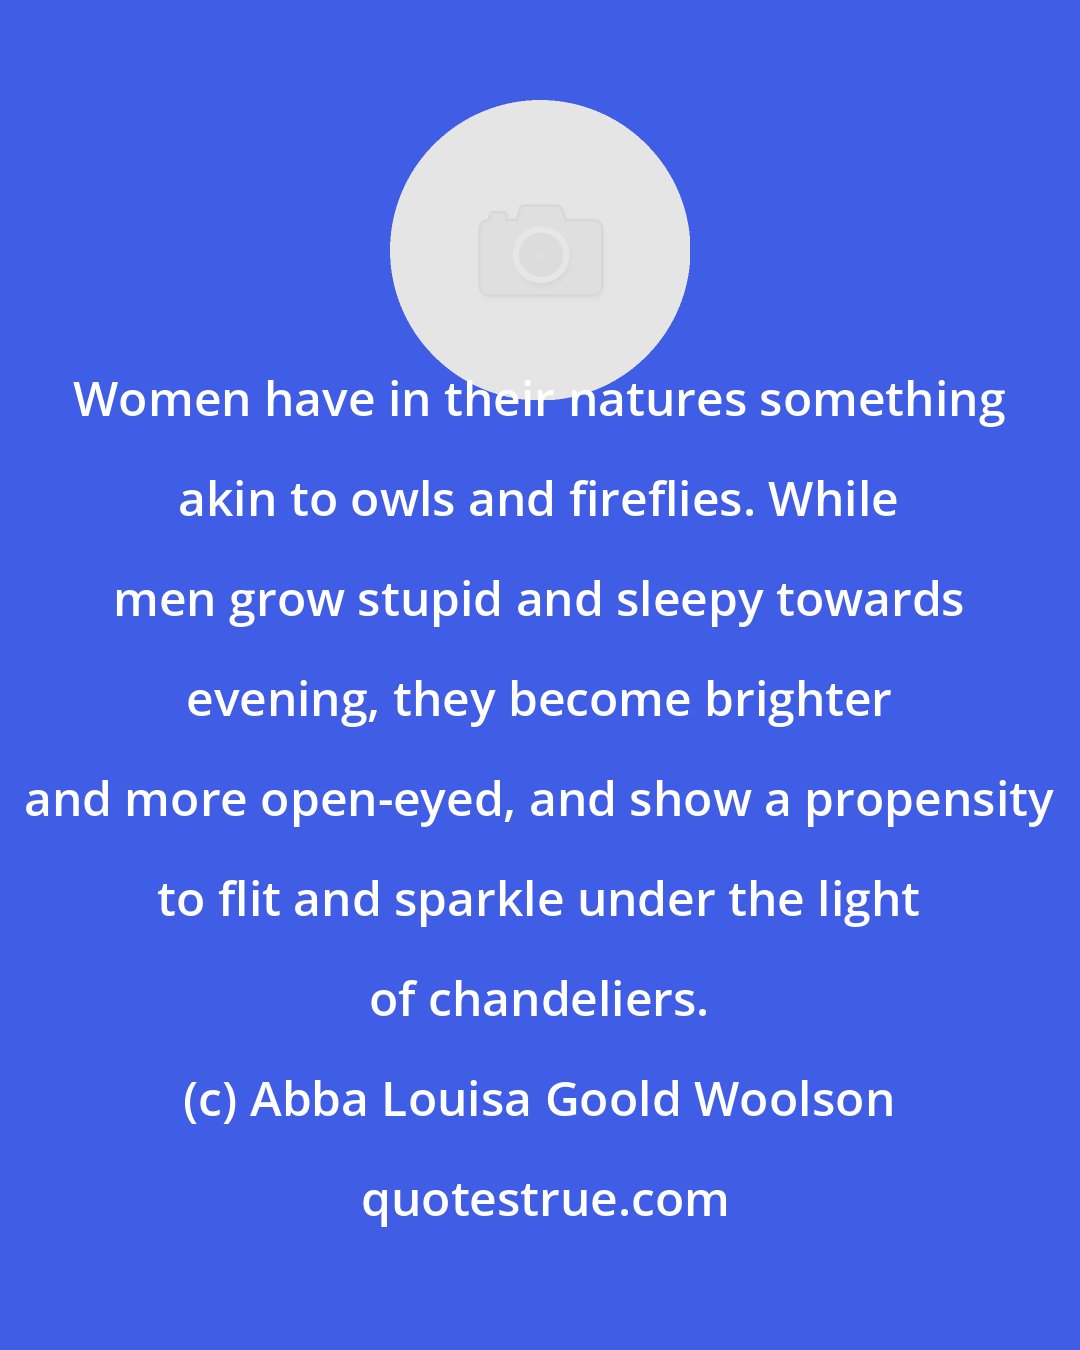 Abba Louisa Goold Woolson: Women have in their natures something akin to owls and fireflies. While men grow stupid and sleepy towards evening, they become brighter and more open-eyed, and show a propensity to flit and sparkle under the light of chandeliers.